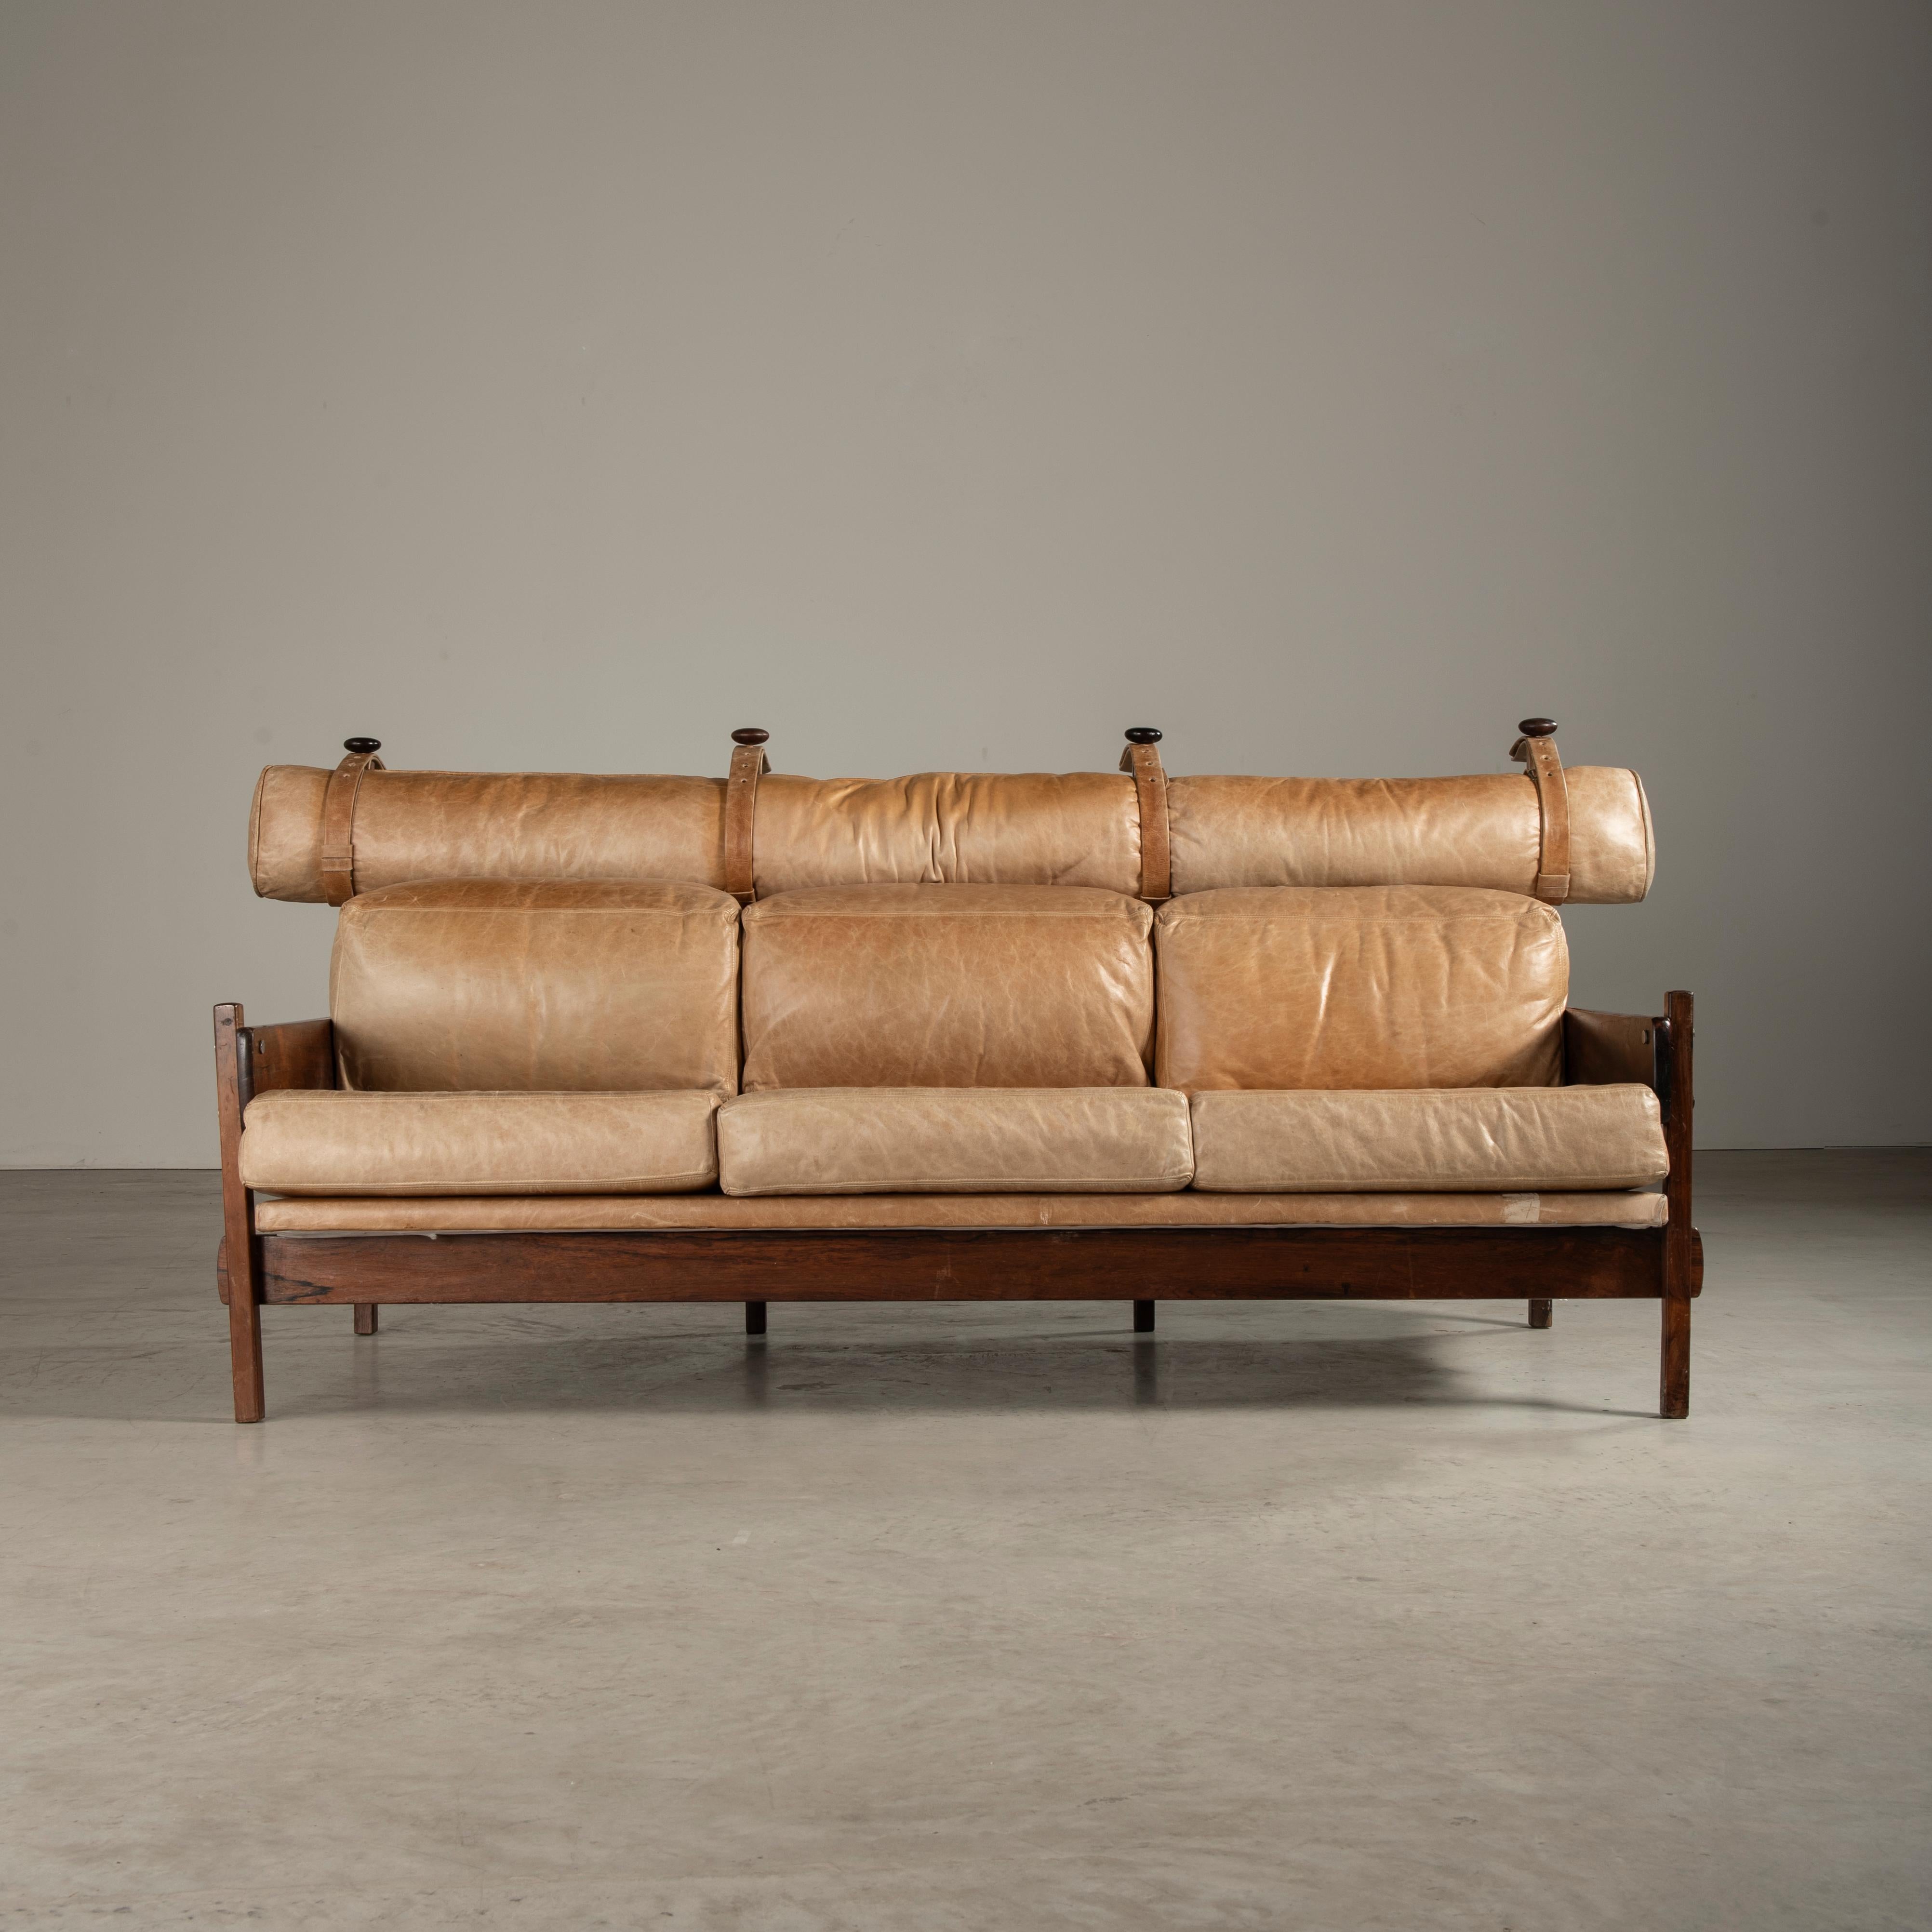 Leather 'Franco' Sofa in solid hard wood, Sérgio Rodrigues, Brazilian Mid-Century Modern For Sale